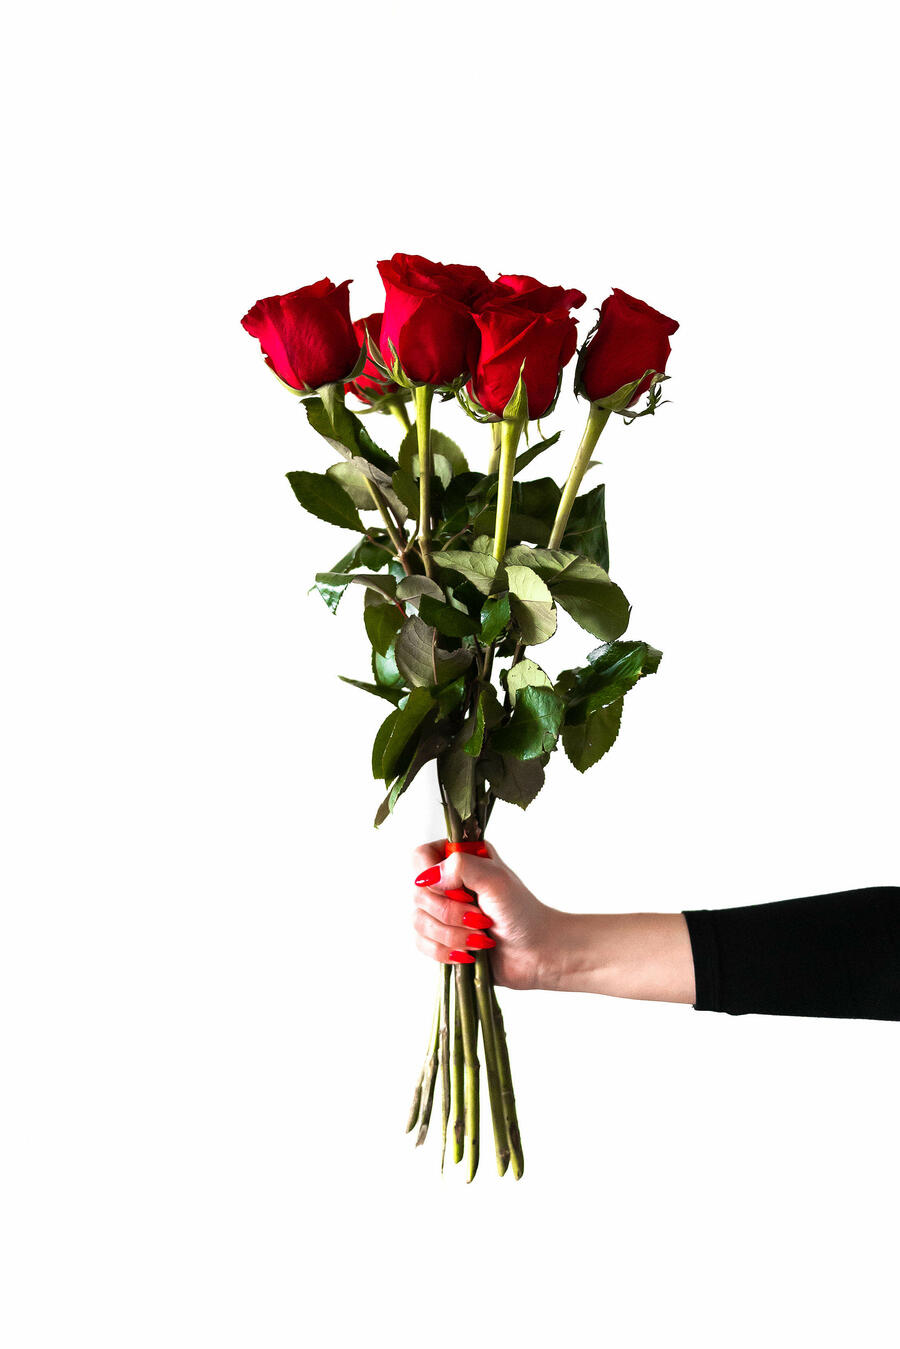 red roses in woman hand 2210x3312 picjumbo2